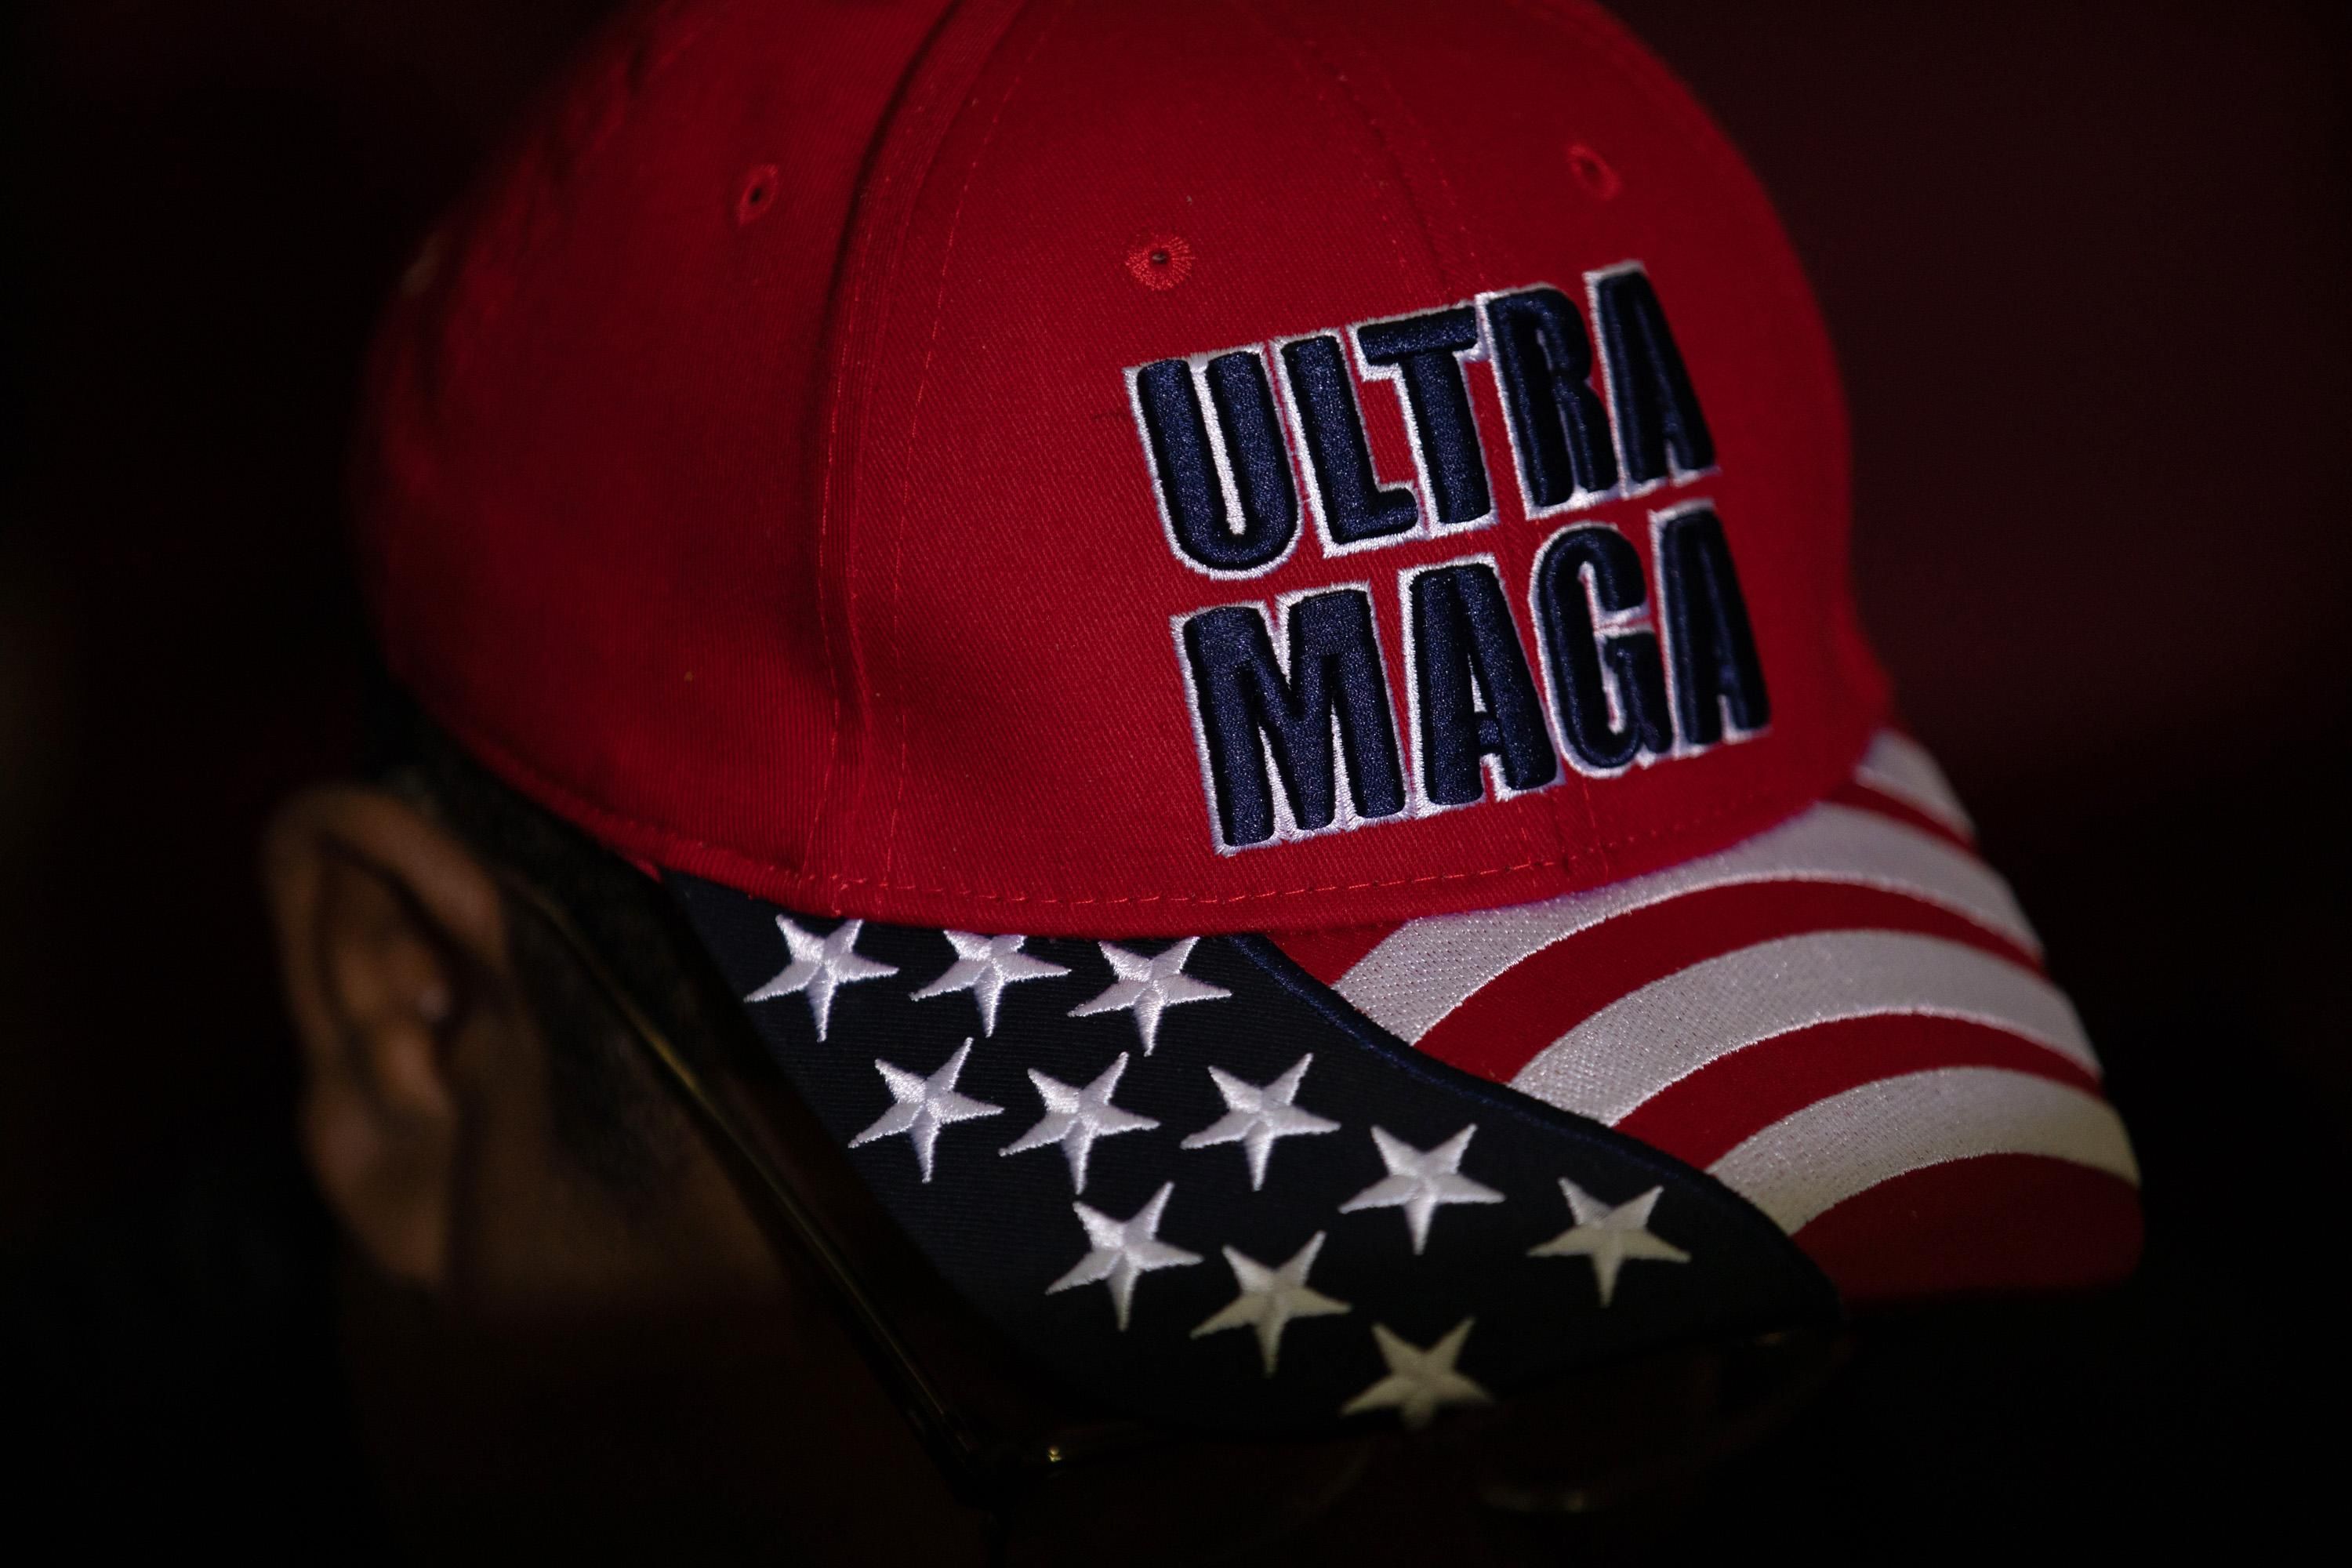 Trump supporter with a hat that reads "Ultra MAGA"